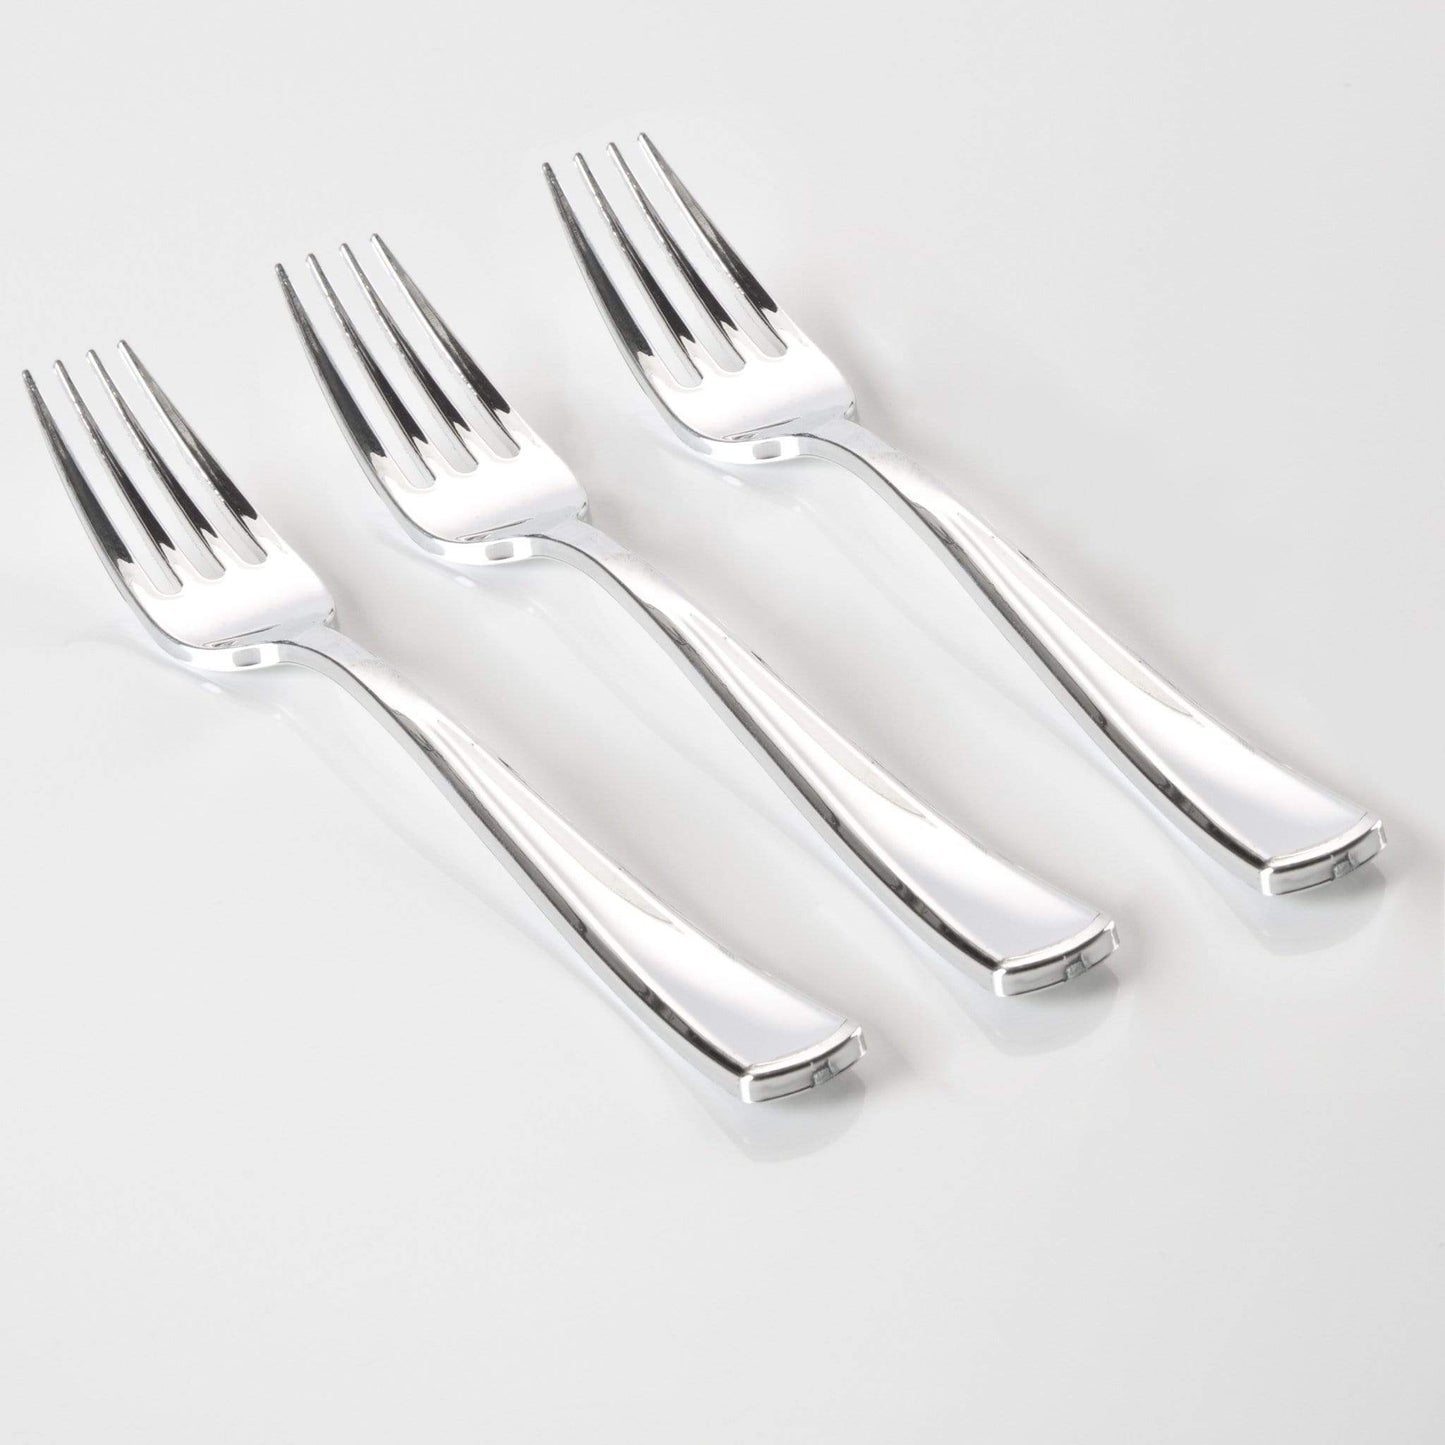 Classic Design Silver Plastic Forks | 20 Forks - SimplySoiree